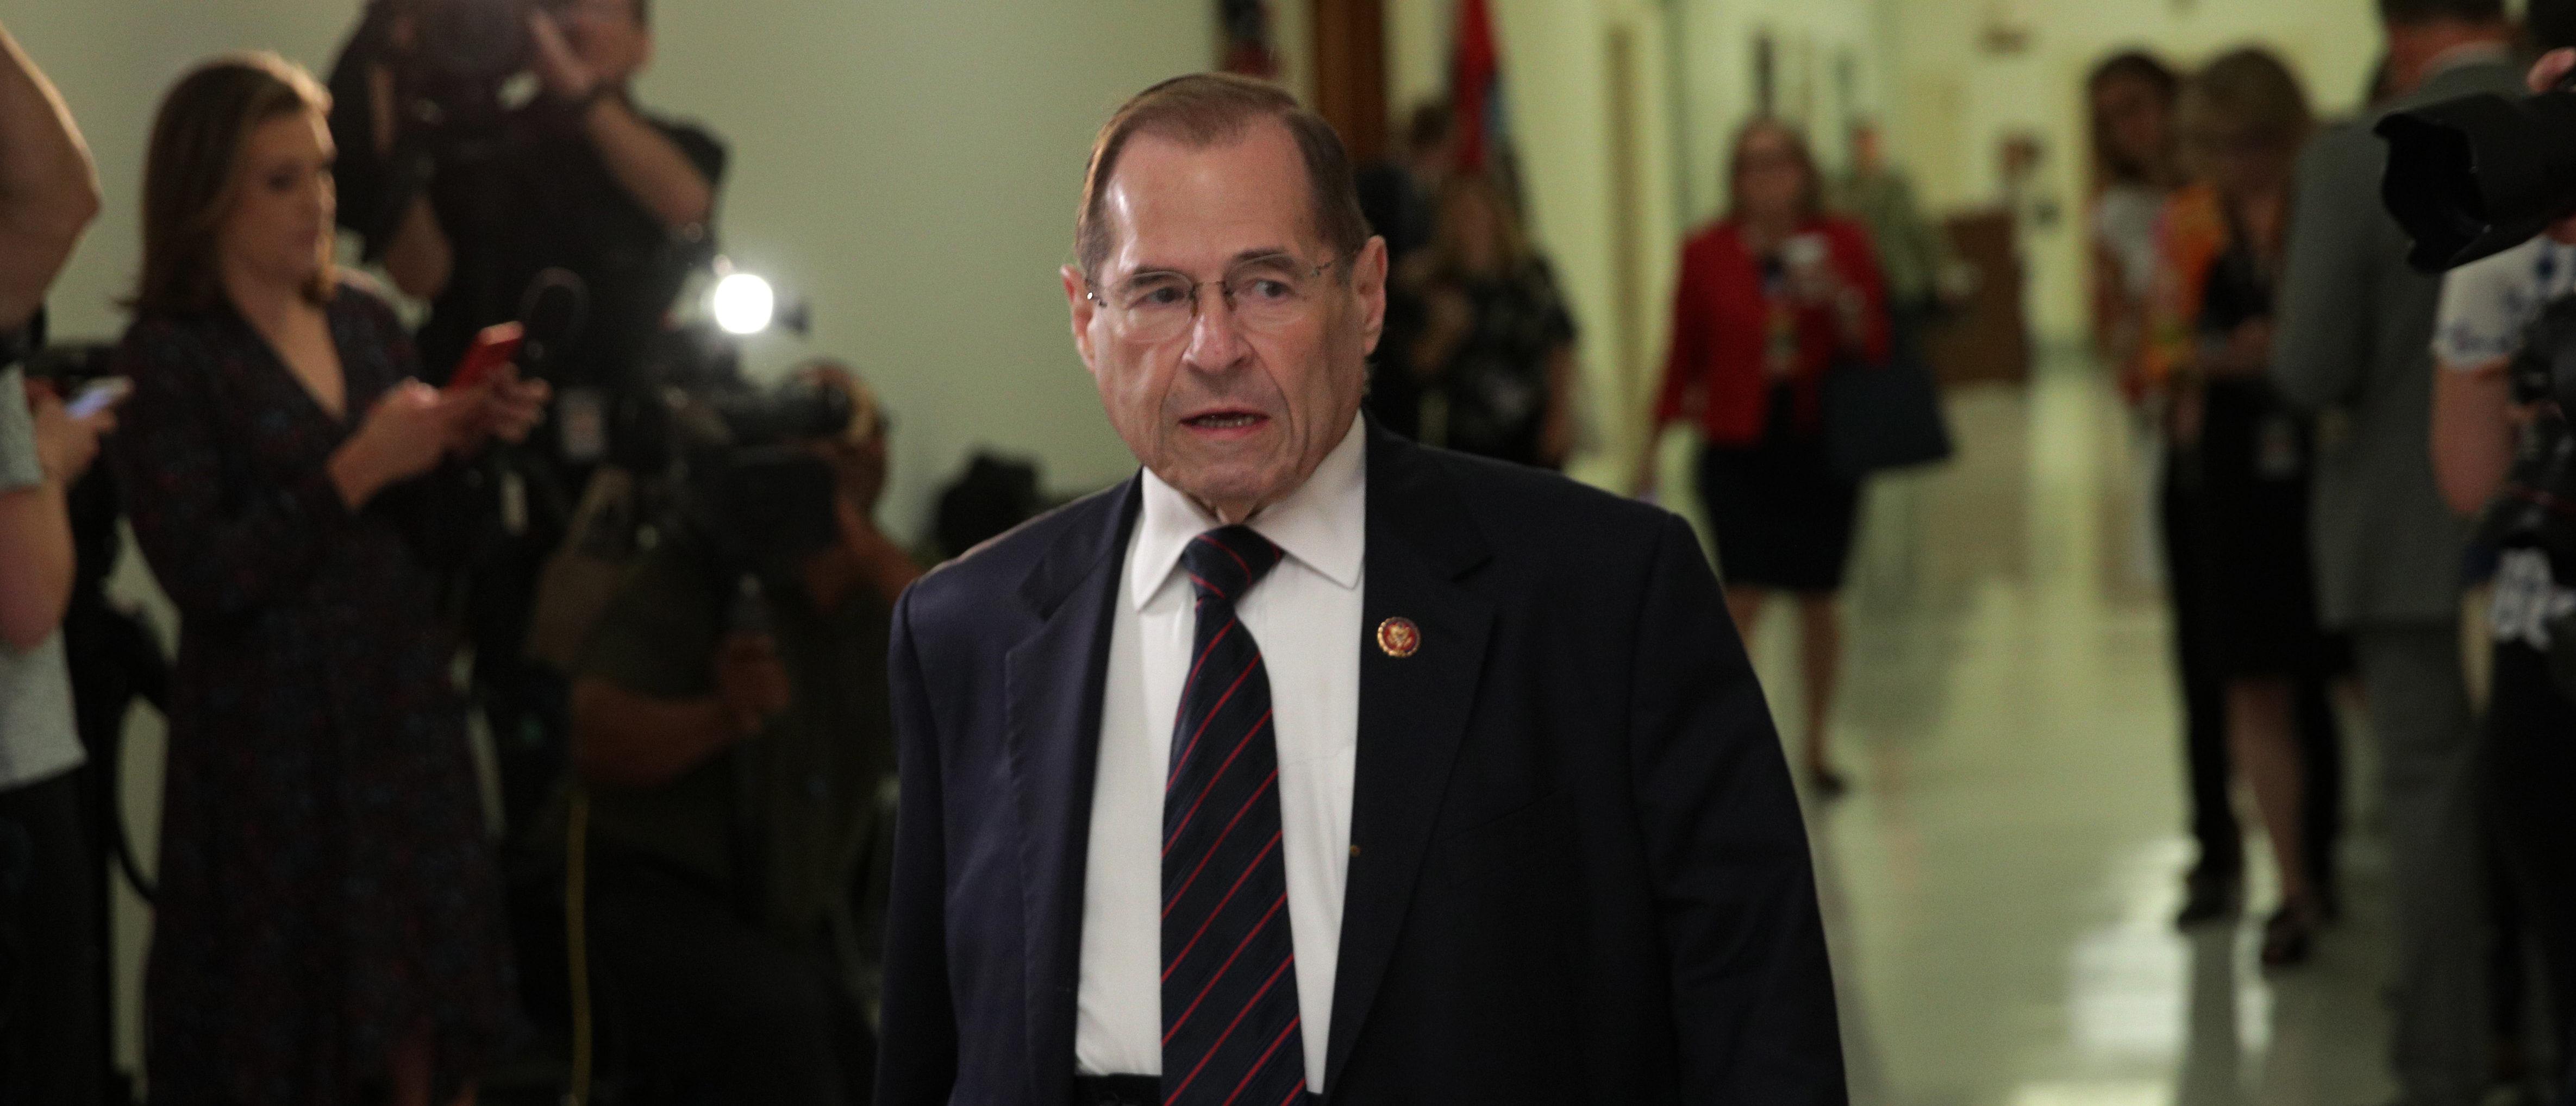 Rep. Jerry Nadler arrives ahead of former White House communications director Hope Hicks being interviewed behind closed door with the House Judiciary Committee on June 19, 2019 (Alex Wong/Getty Images)